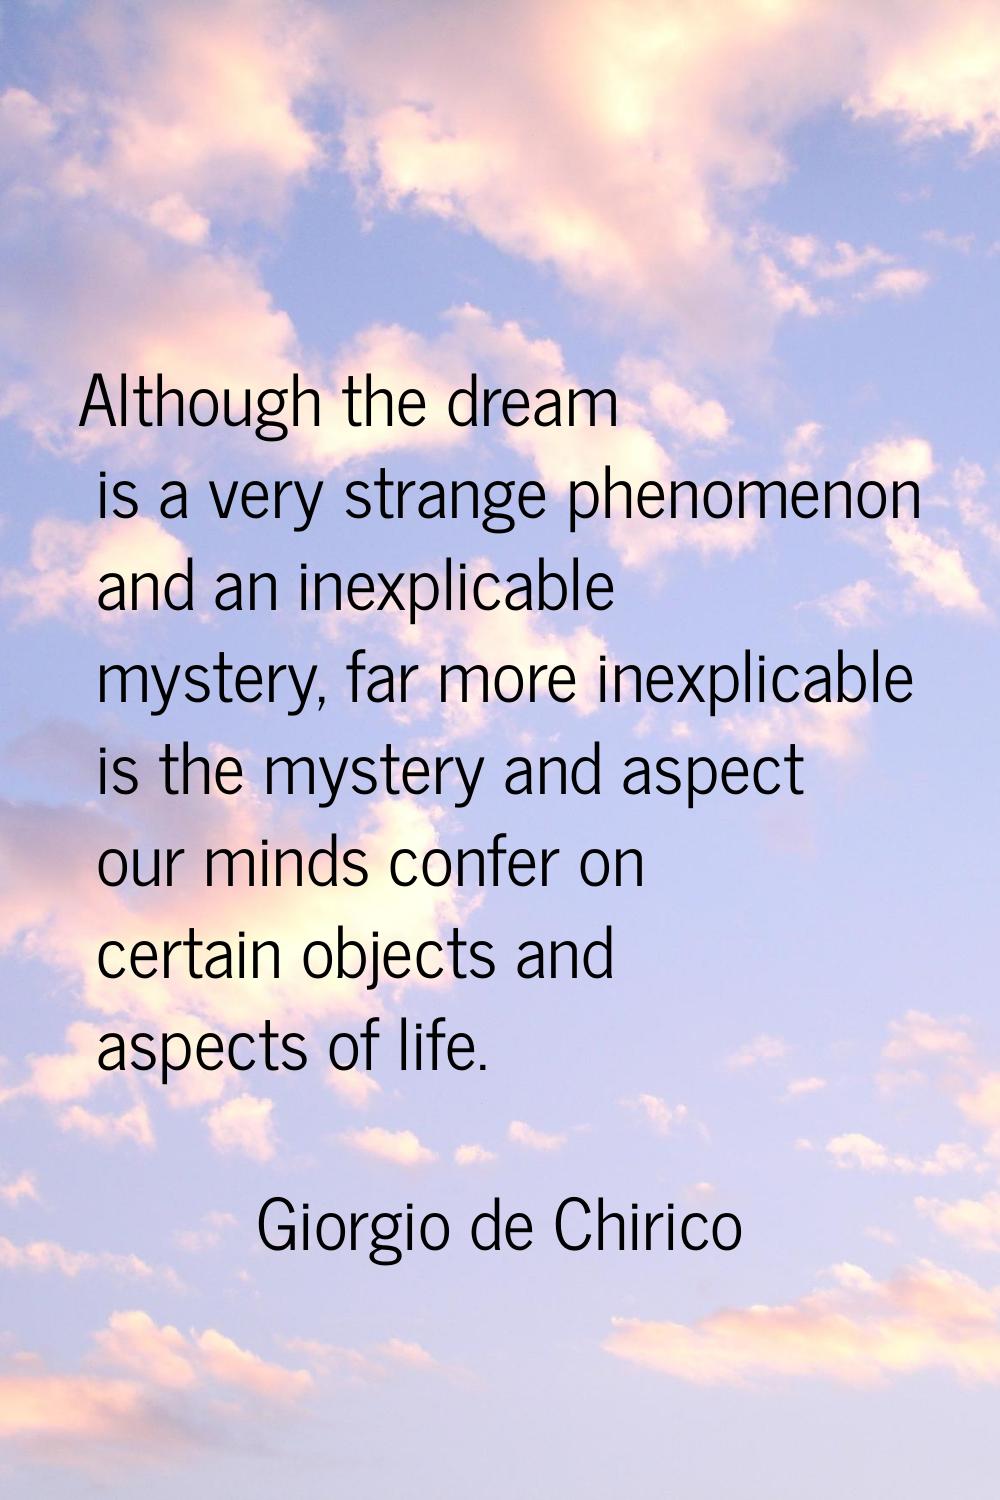 Although the dream is a very strange phenomenon and an inexplicable mystery, far more inexplicable 